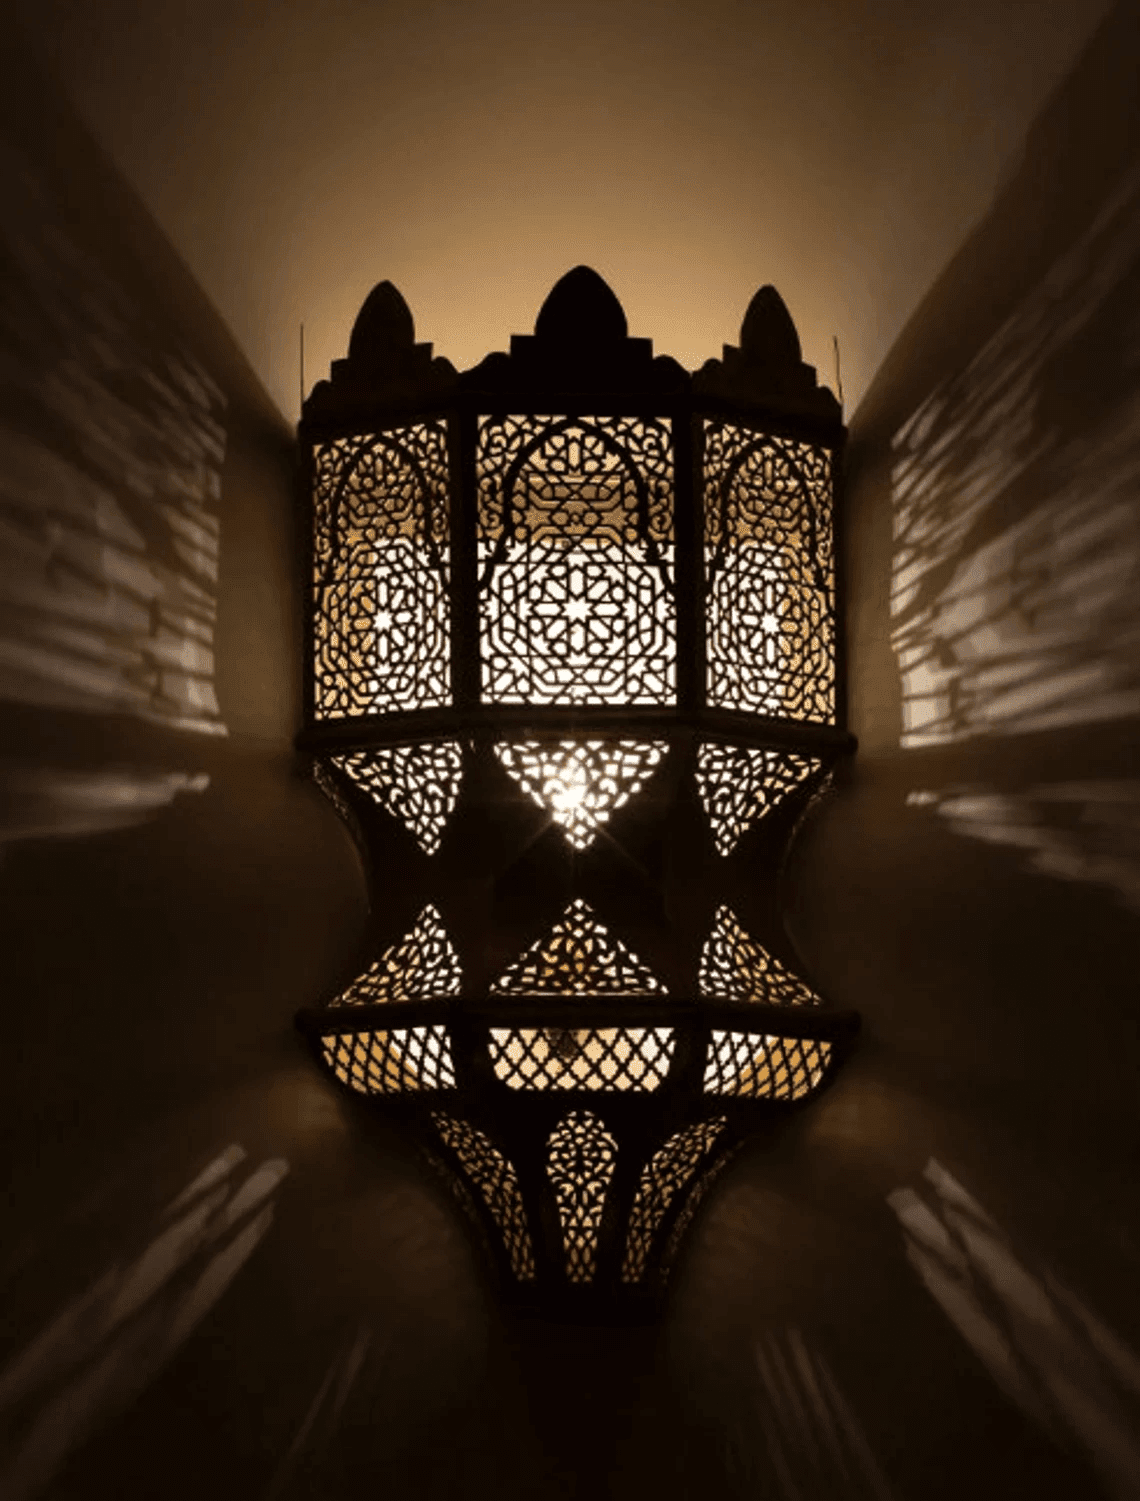 wall sconce, traditional sconce, moroccan lamp, moroccan sconce, sconce lamp, wall lamp, brass sconce, moroccan mosaic lighting - Ettilux Home